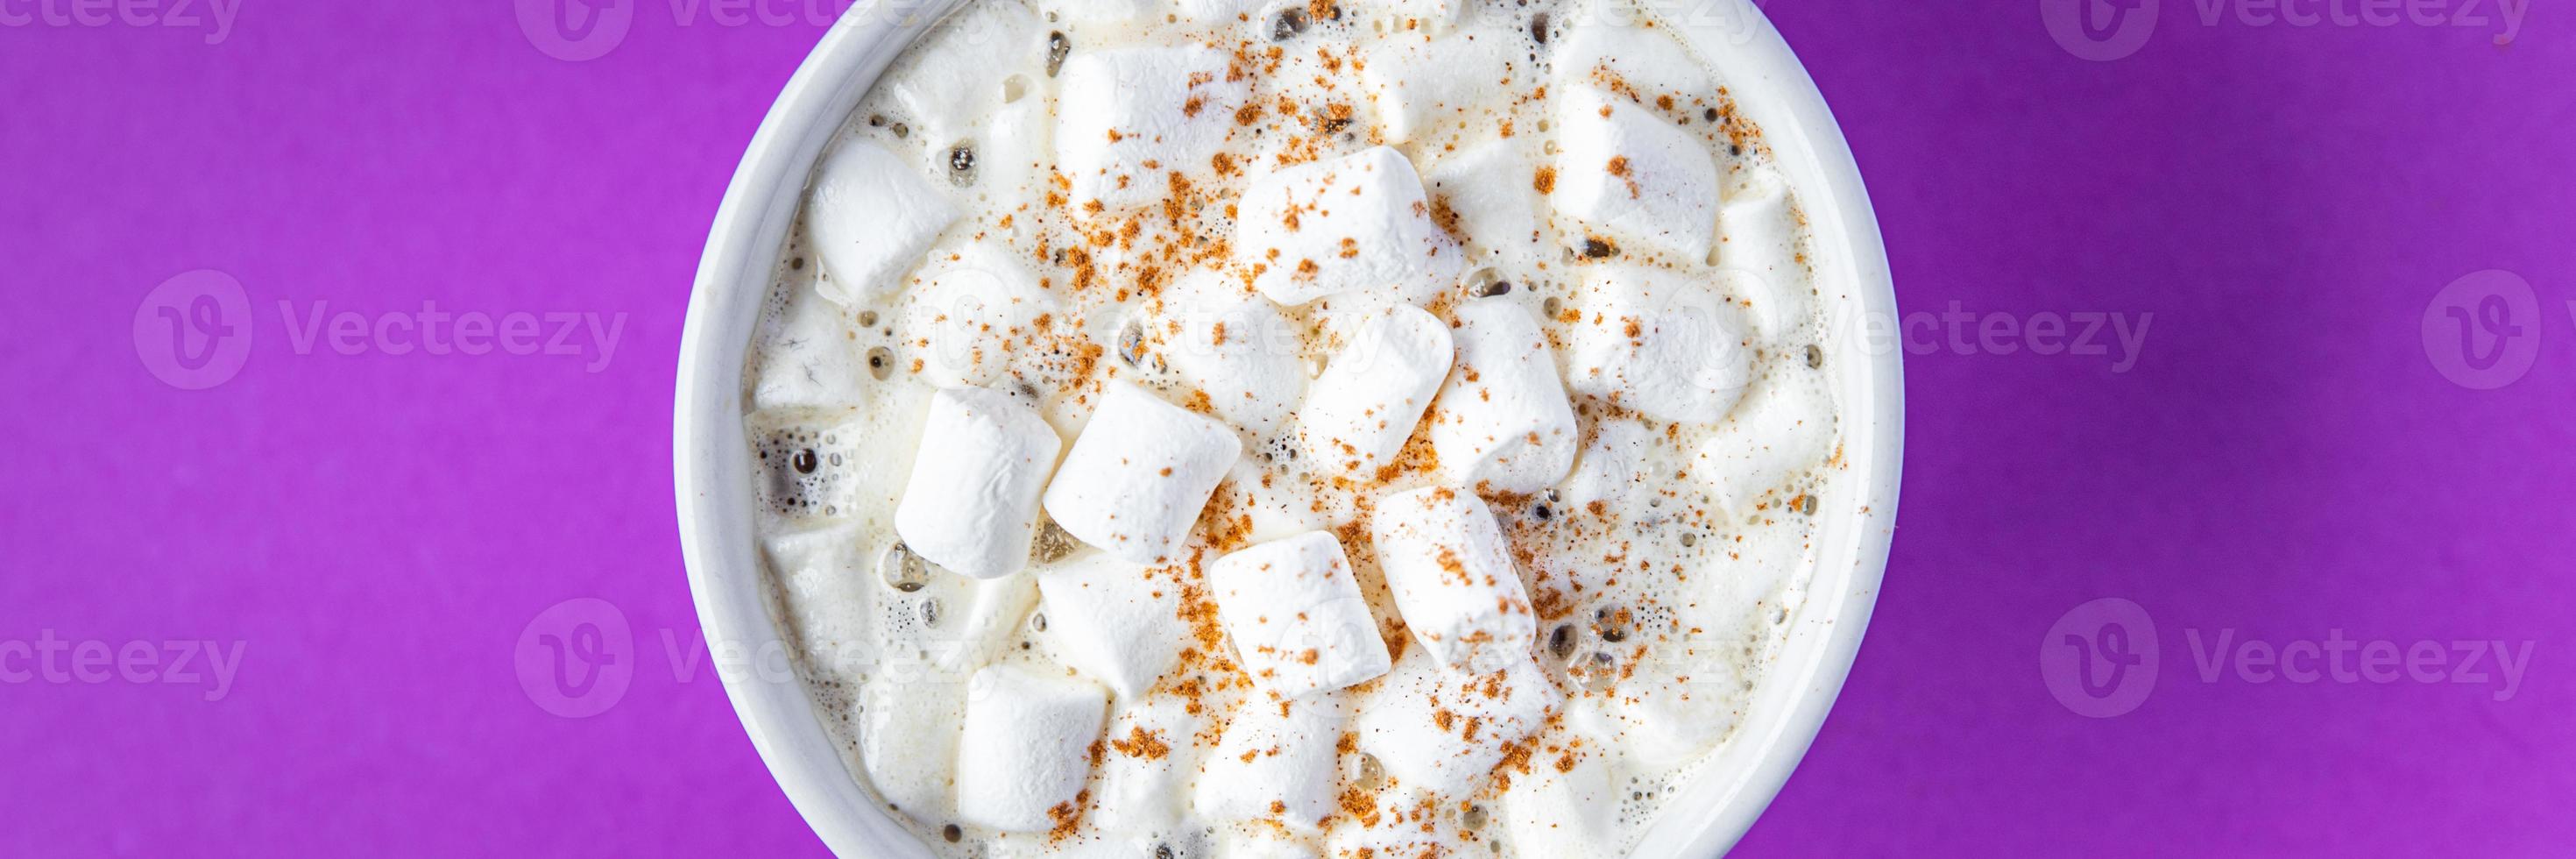 cocoa with marshmallows hot coffee drink sweet beverage photo